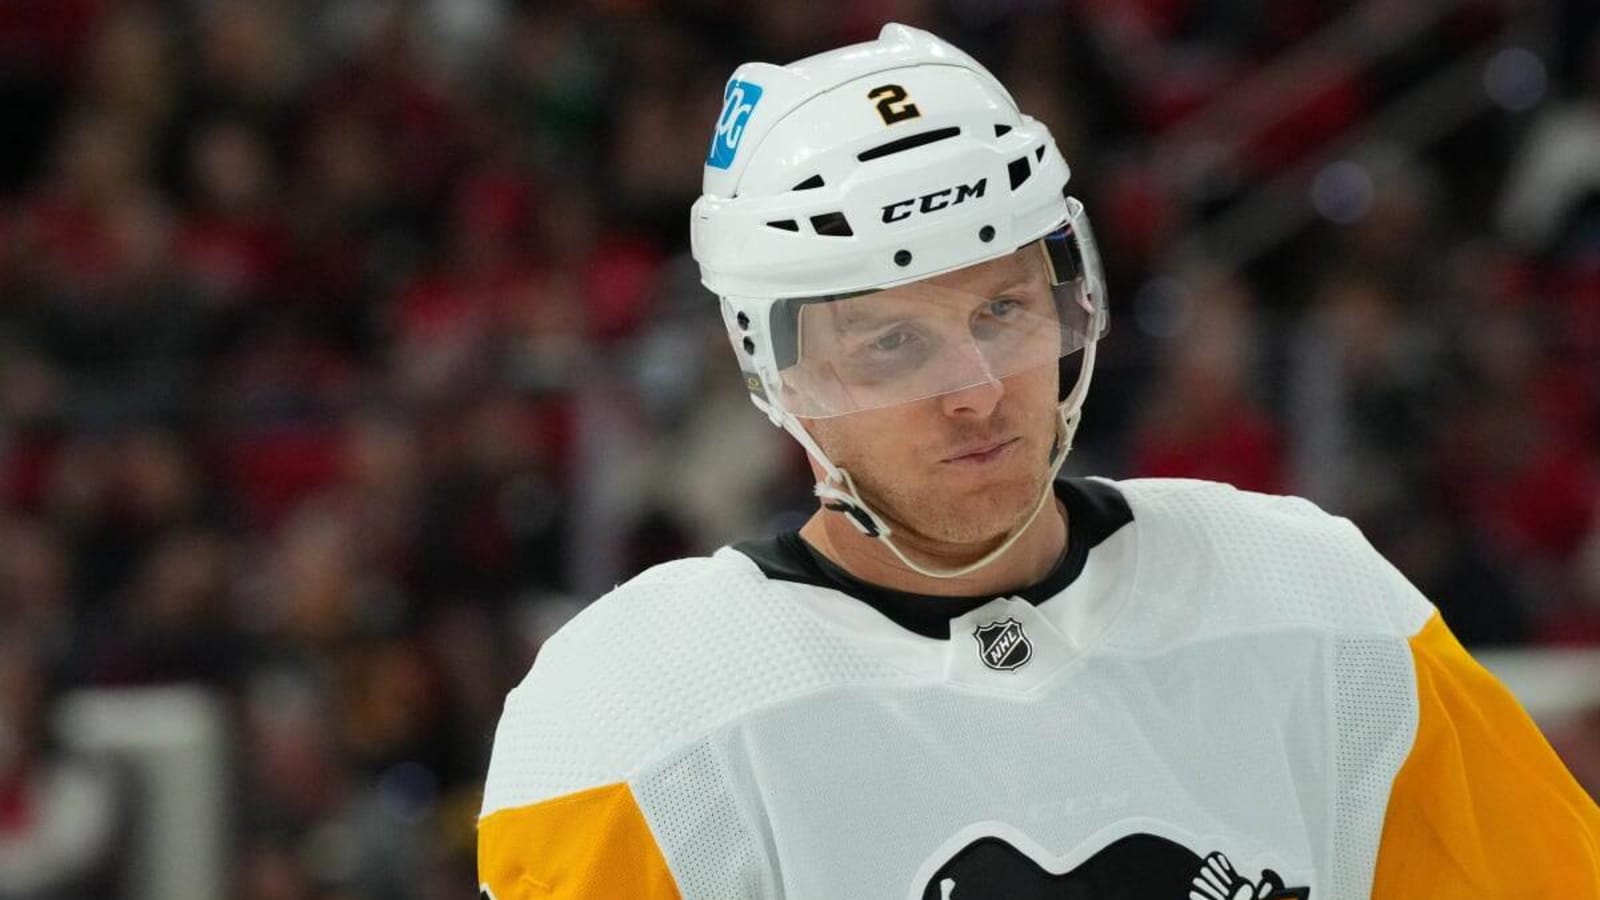 Penguins Defenseman Chad Ruhwedel Being Evaluated for Upper-Body Injury